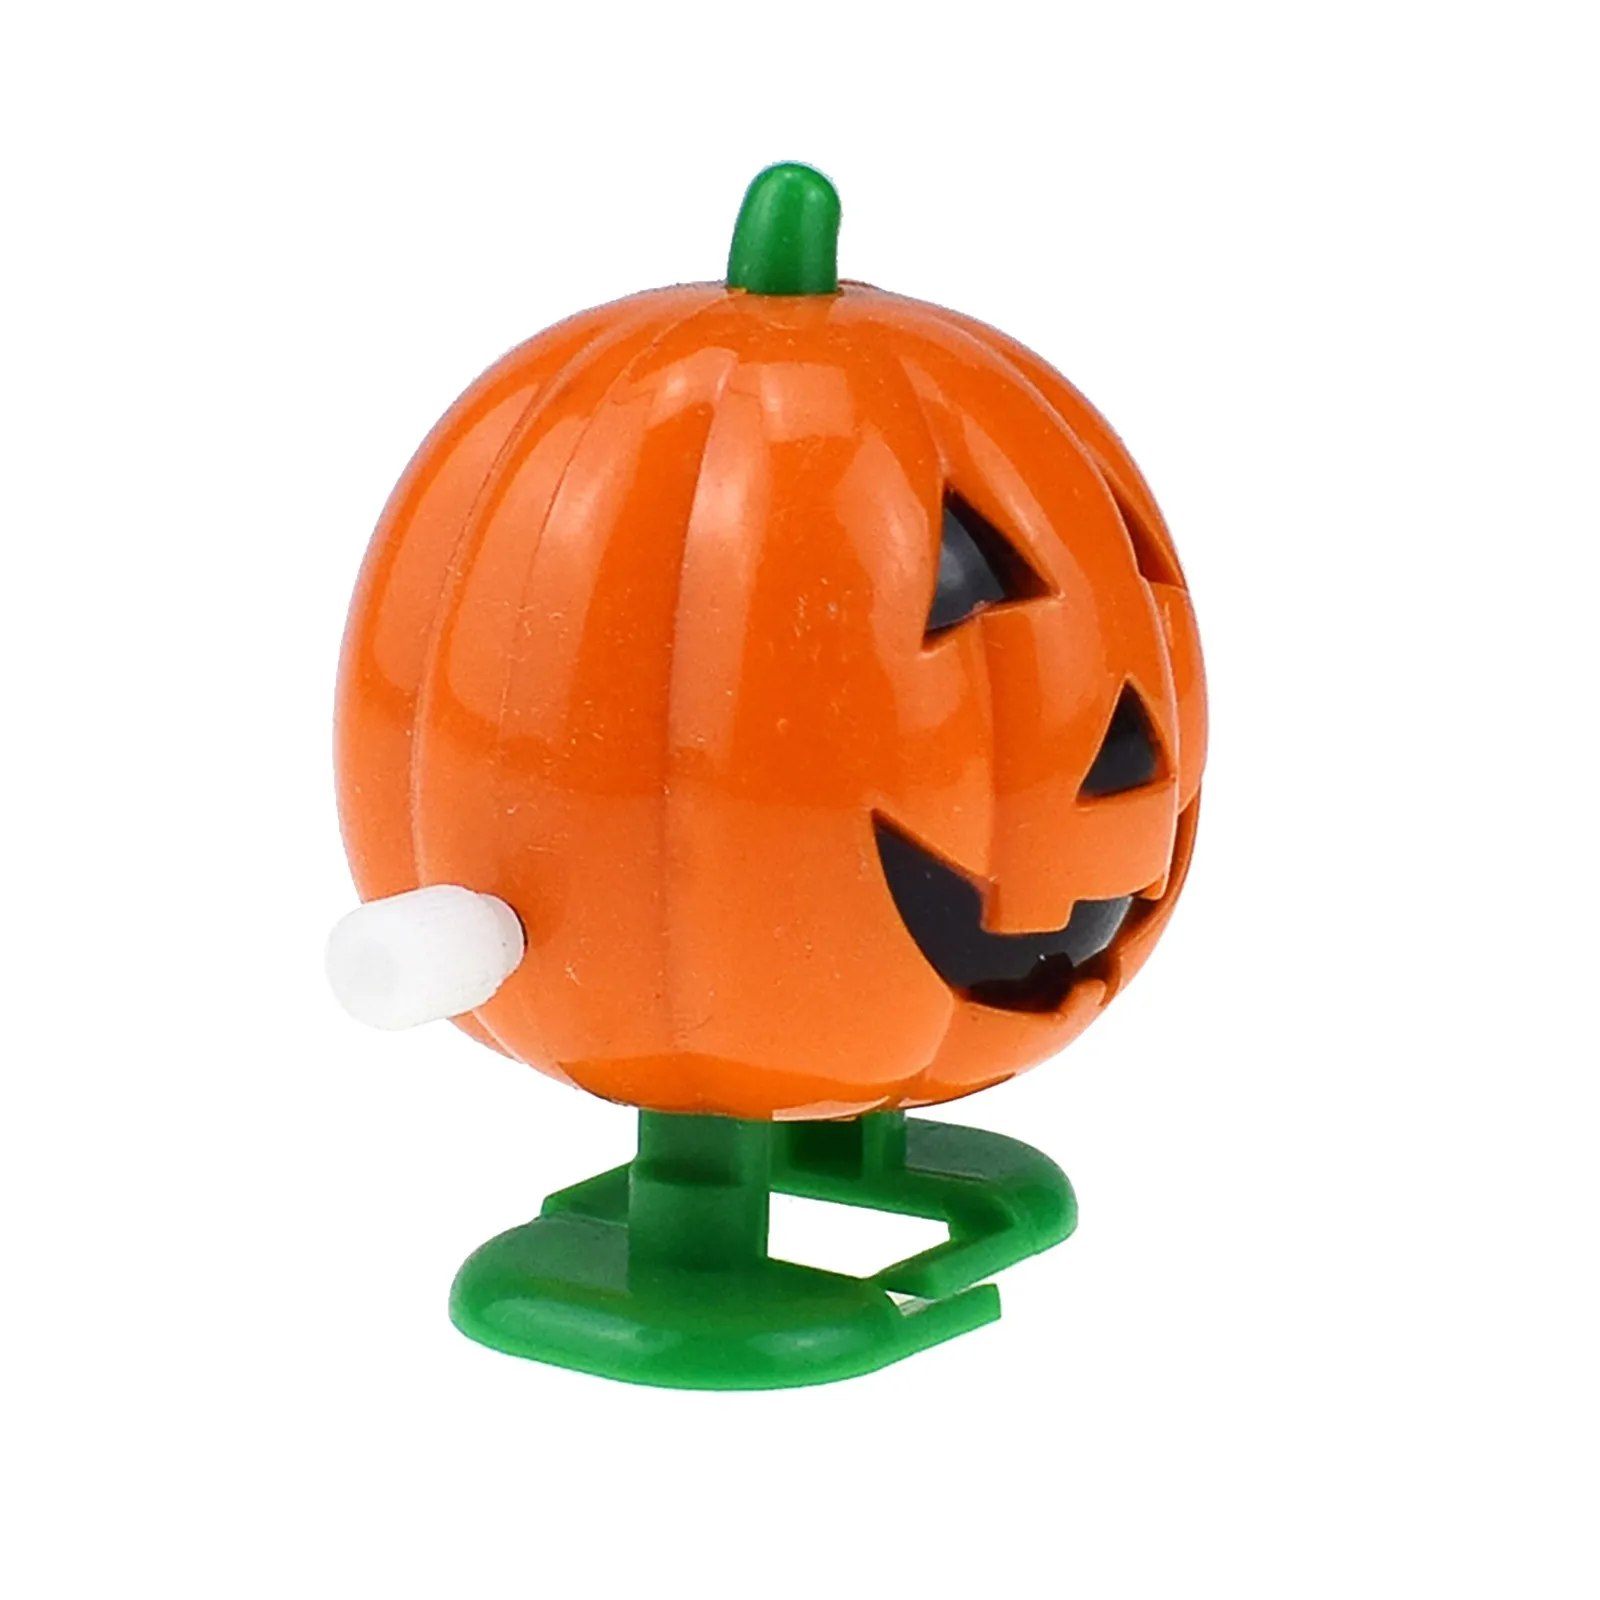 Whimsical Pumpkin Figure Light Up and Sound Weeble Wobble Halloween 3 inch B8* 